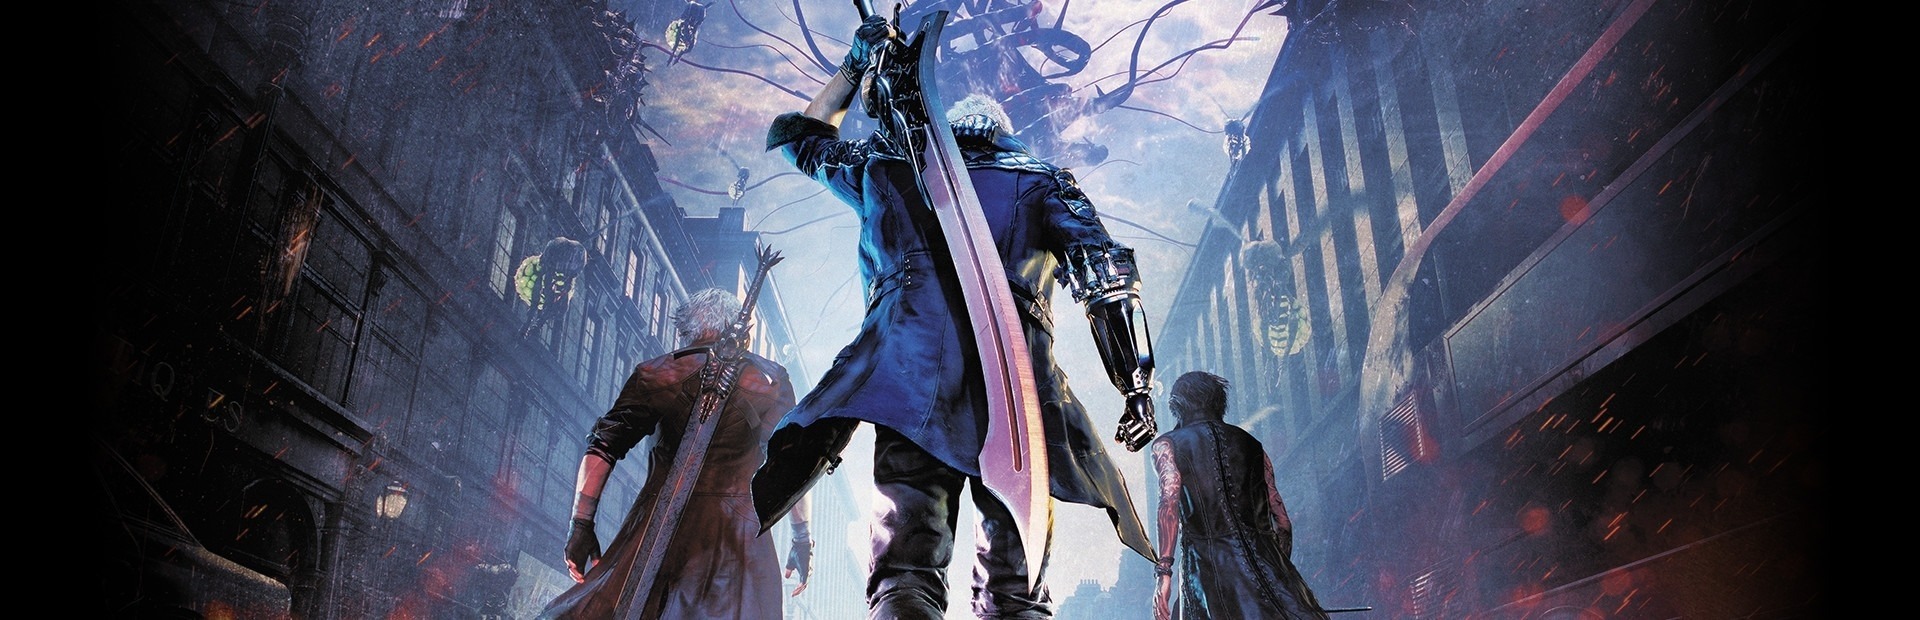 Devil May Cry 5 - Personnage jouable : Vergil